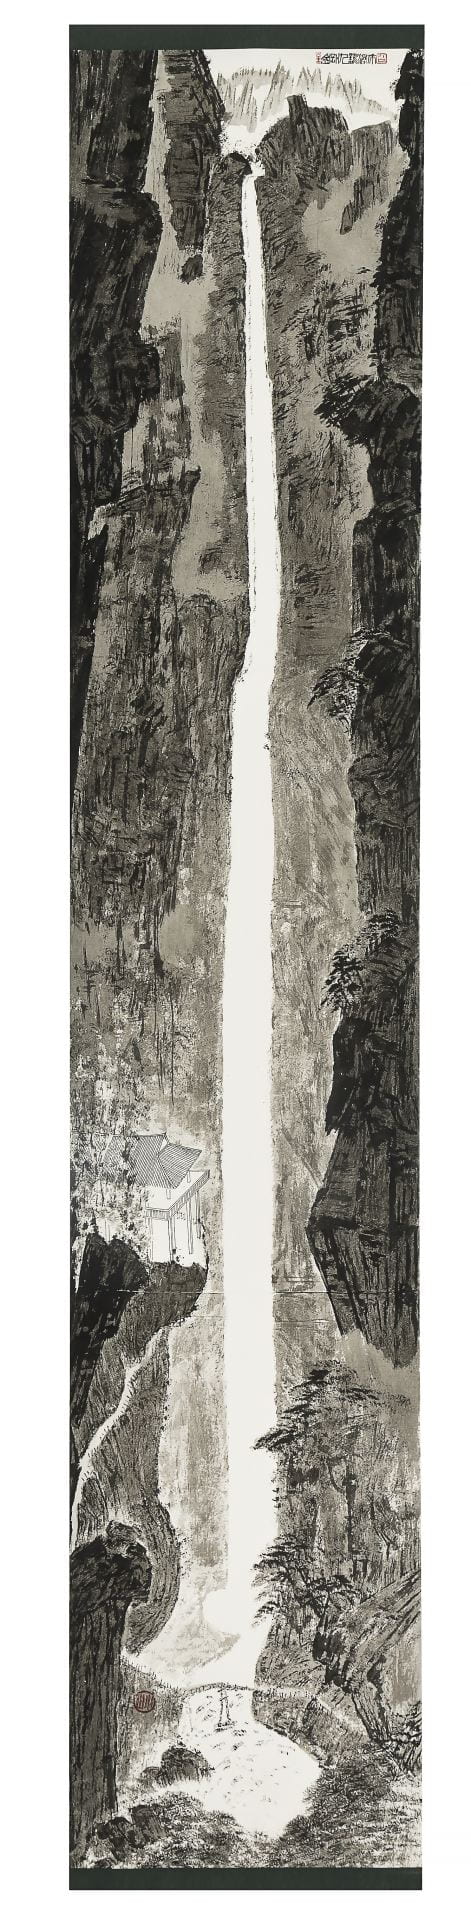 An ink-and-wash painting 
by Park Dae Sung
created for 
"Park Dae Sung: Ink and Soul (art exhibit)"
at Harvard University 
(Sept 19- Dec 8, 2022)
Image Courtesy of Gana Art Gallery